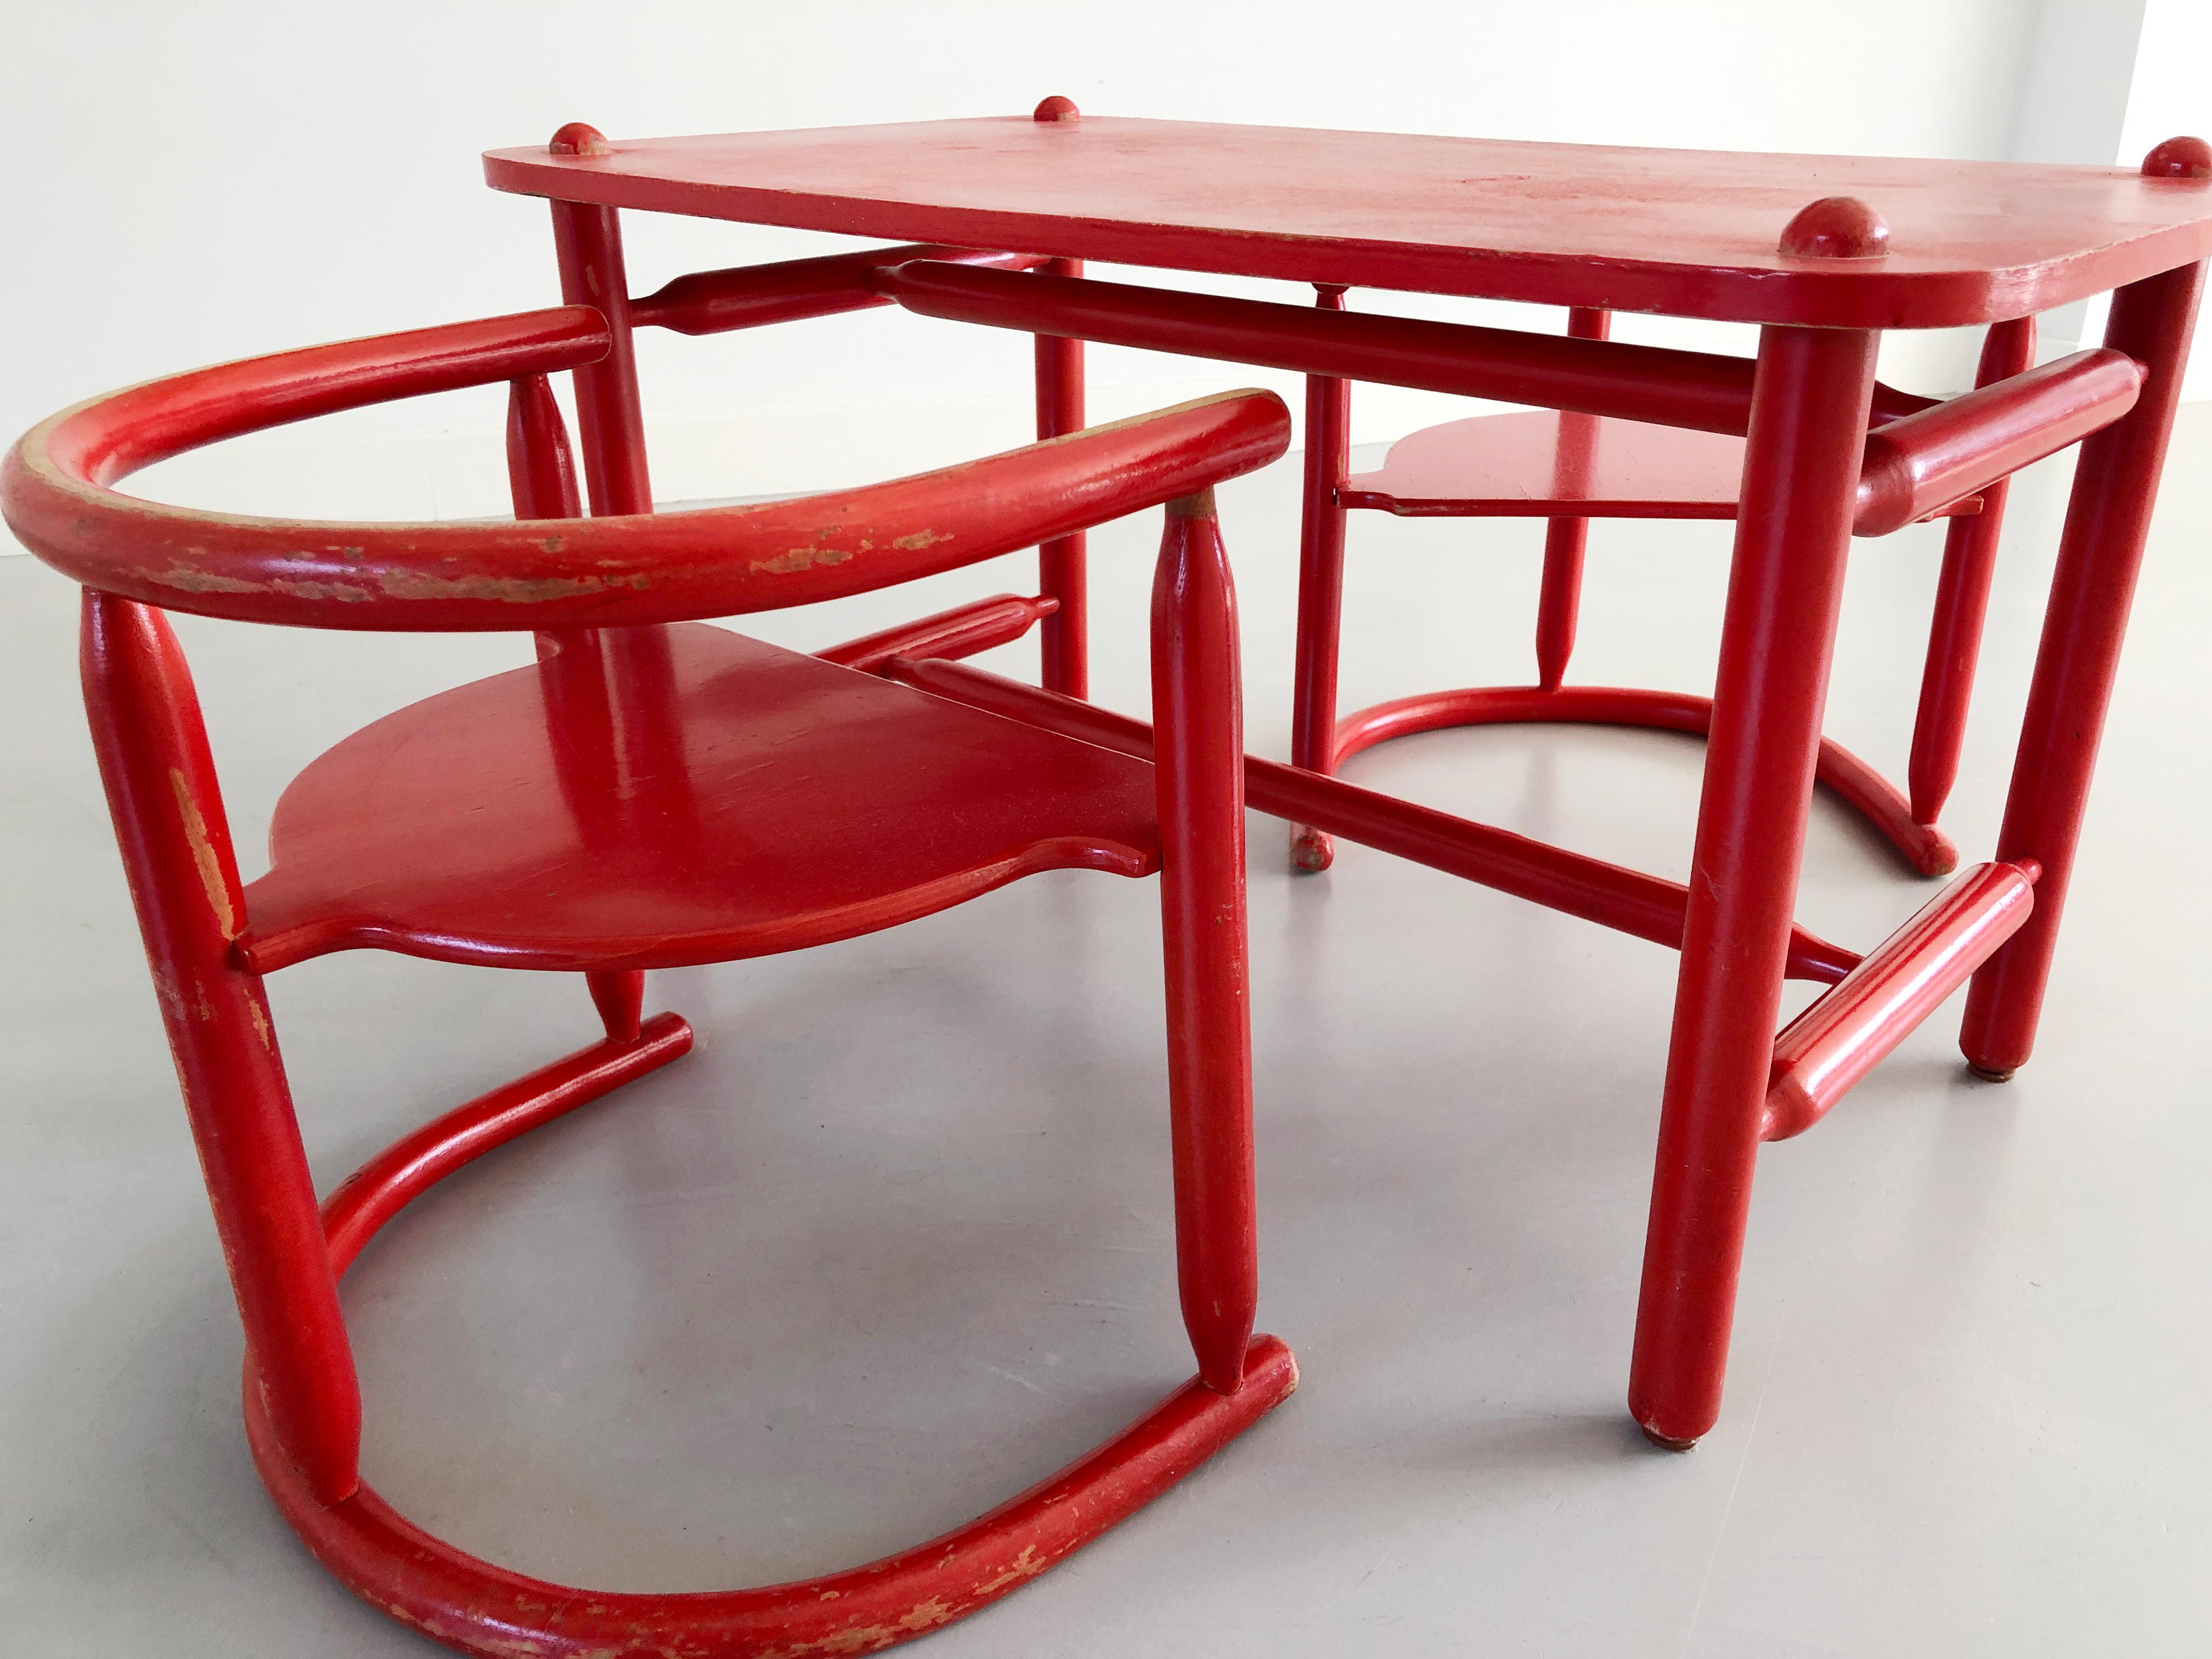 2 Chairs & Table set Anna - Karin Mobring for IKEA 1963 - Original paint For Sale 5